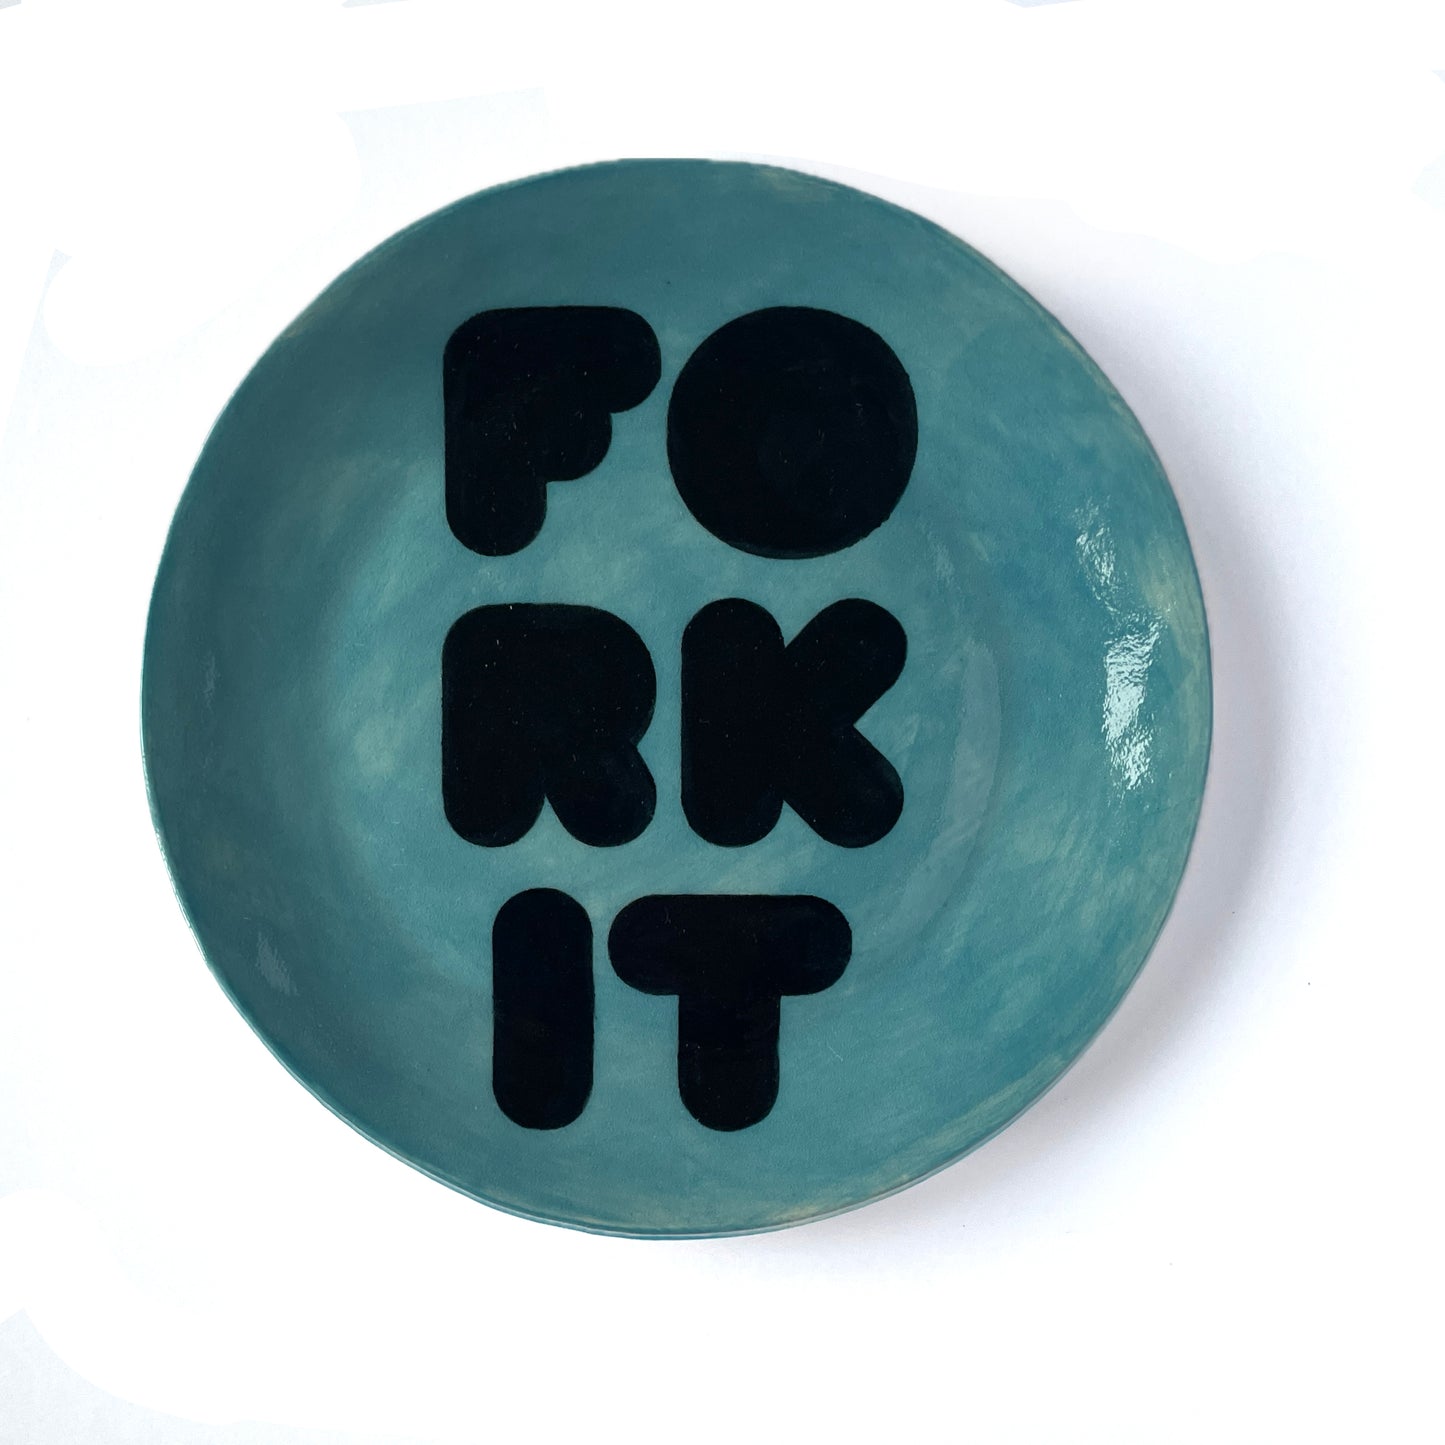 Withnail and I – 'Fork It' Plate